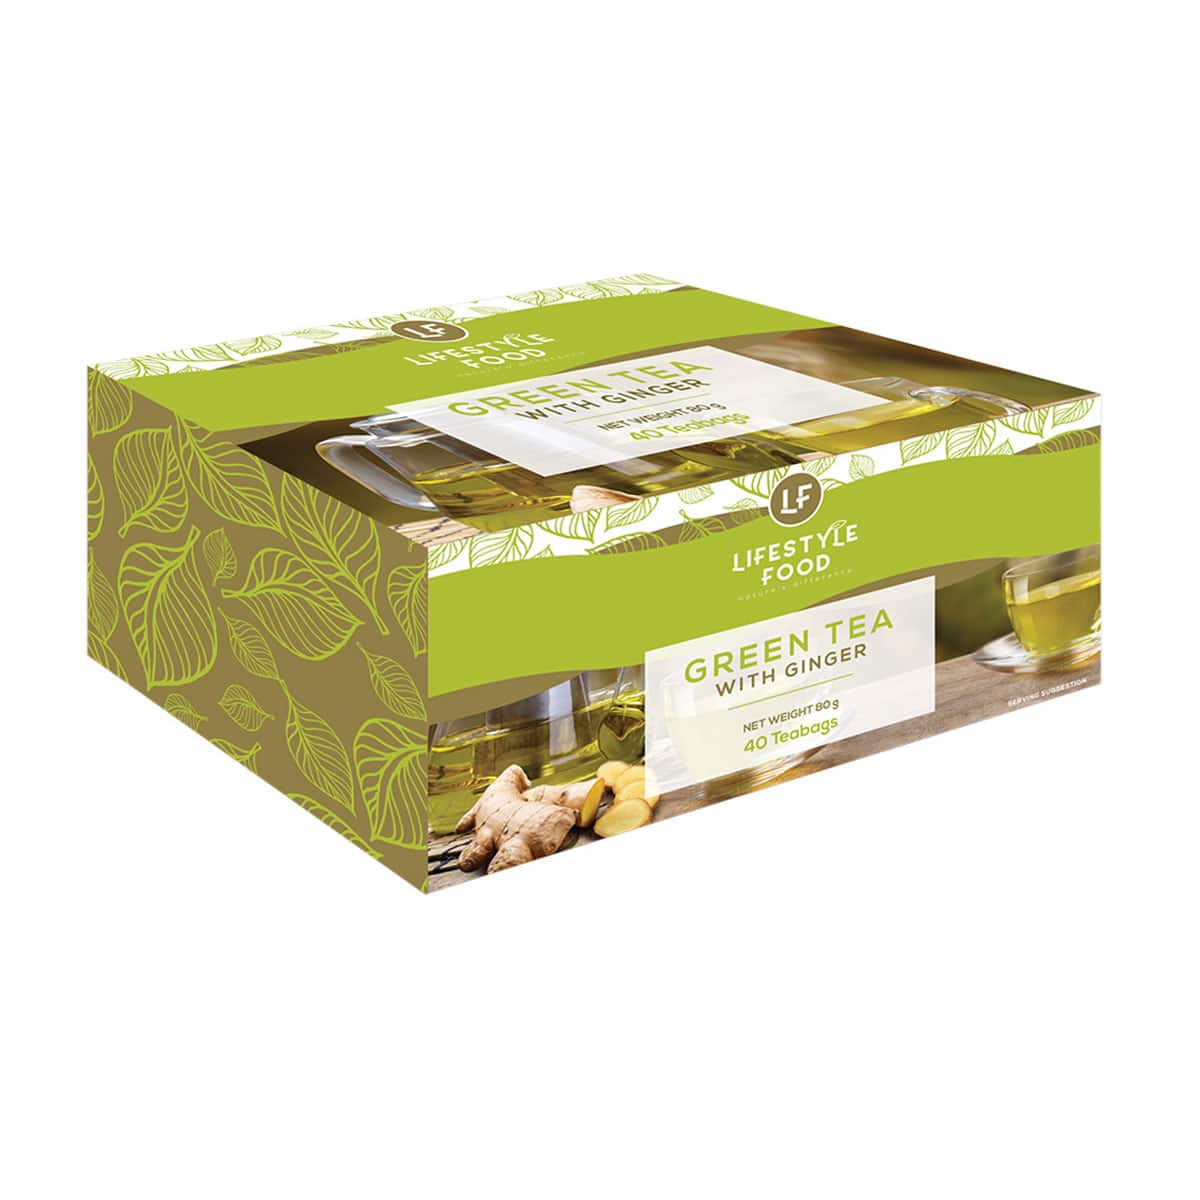 Lifestyle Food Green Tea Ginger Value Pack - 40 Teabags